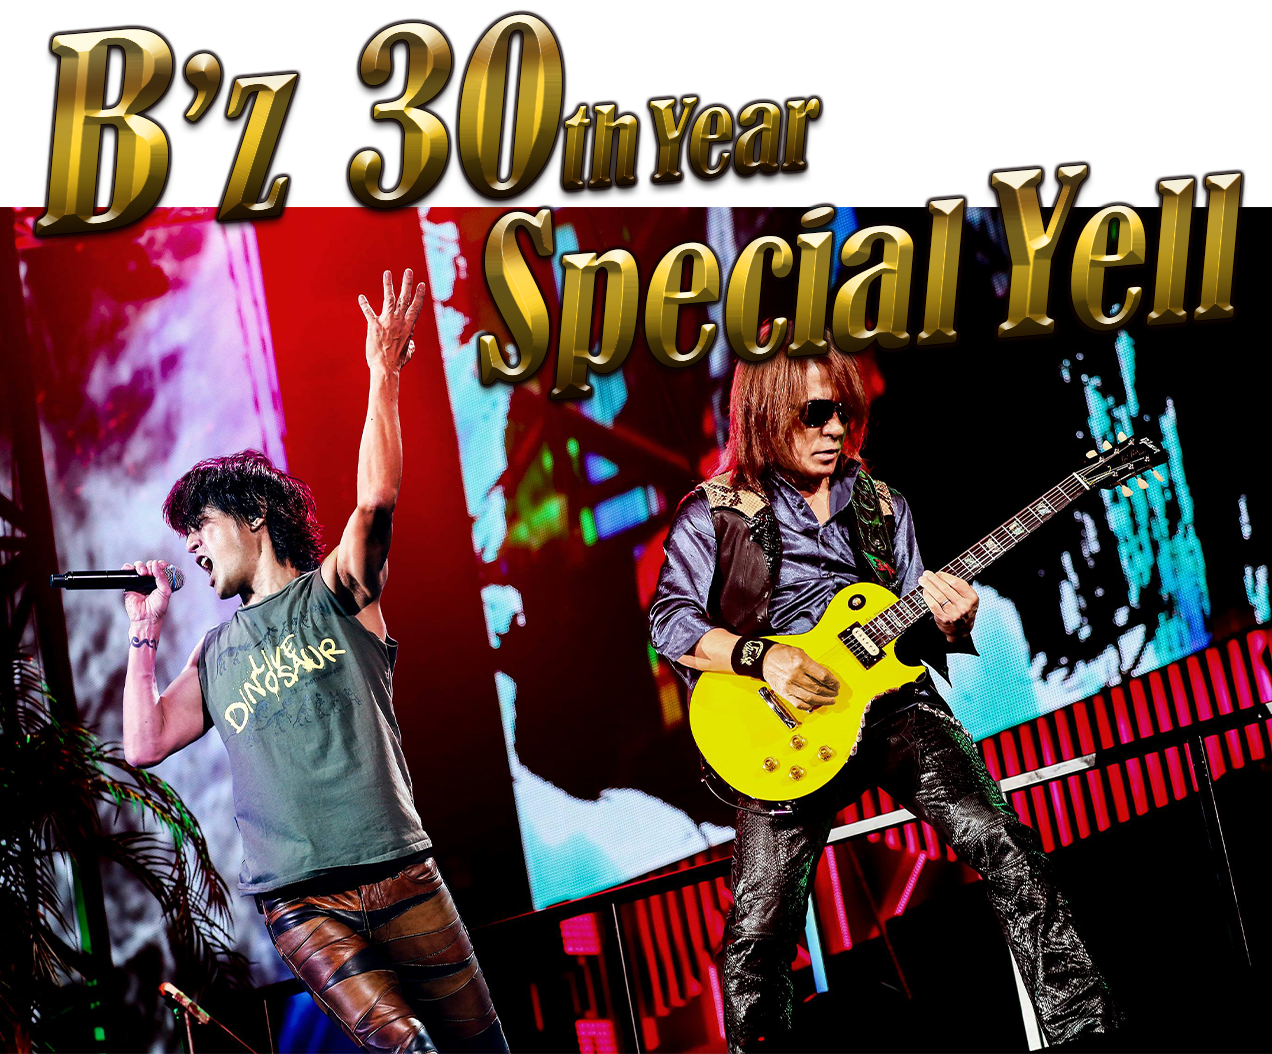 B'z 30th Year Special Yell